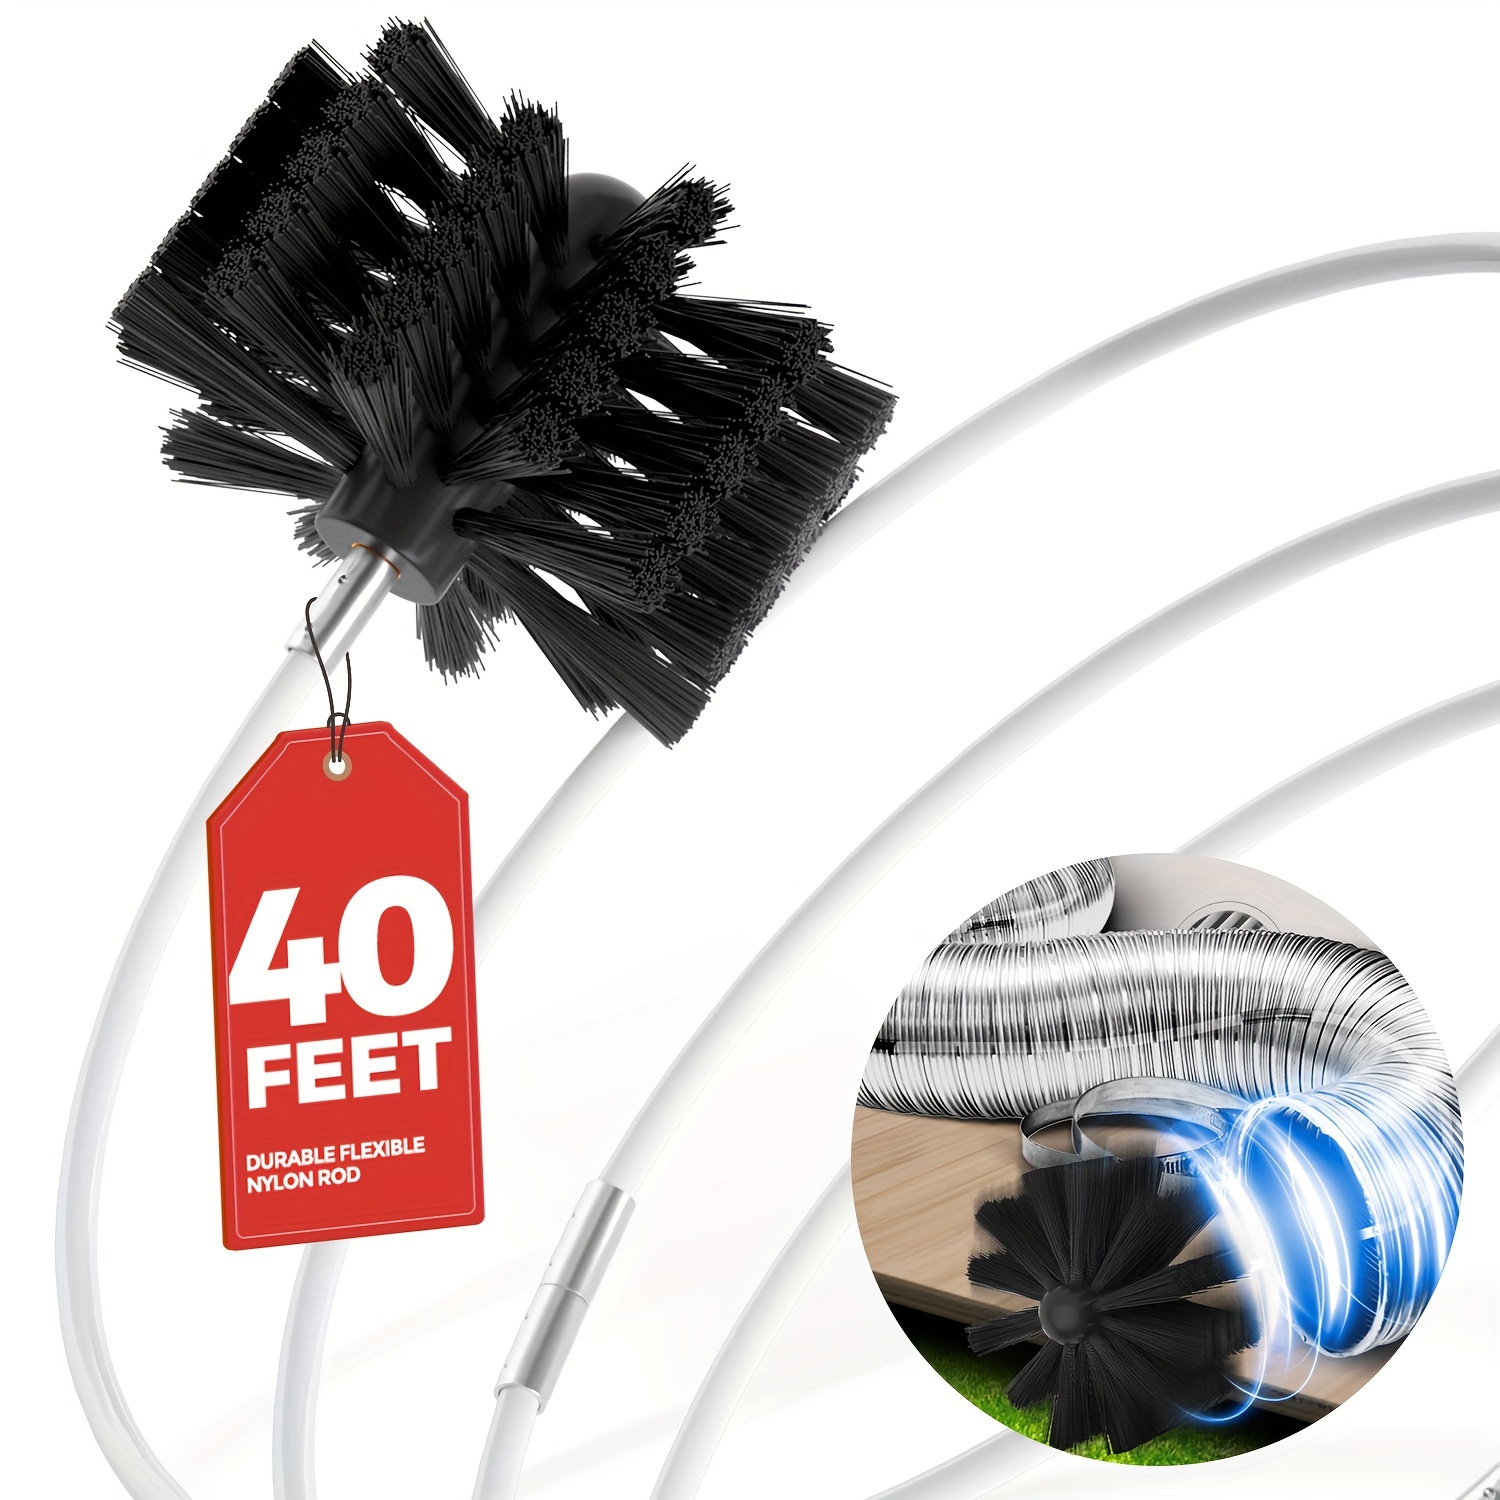 Holikme 30 Feet Dryer Vent Cleaning Brush, Lint Remover,Fireplace Chimney Brushes, Extends Up to 30 Feet, Synthetic Brush Head